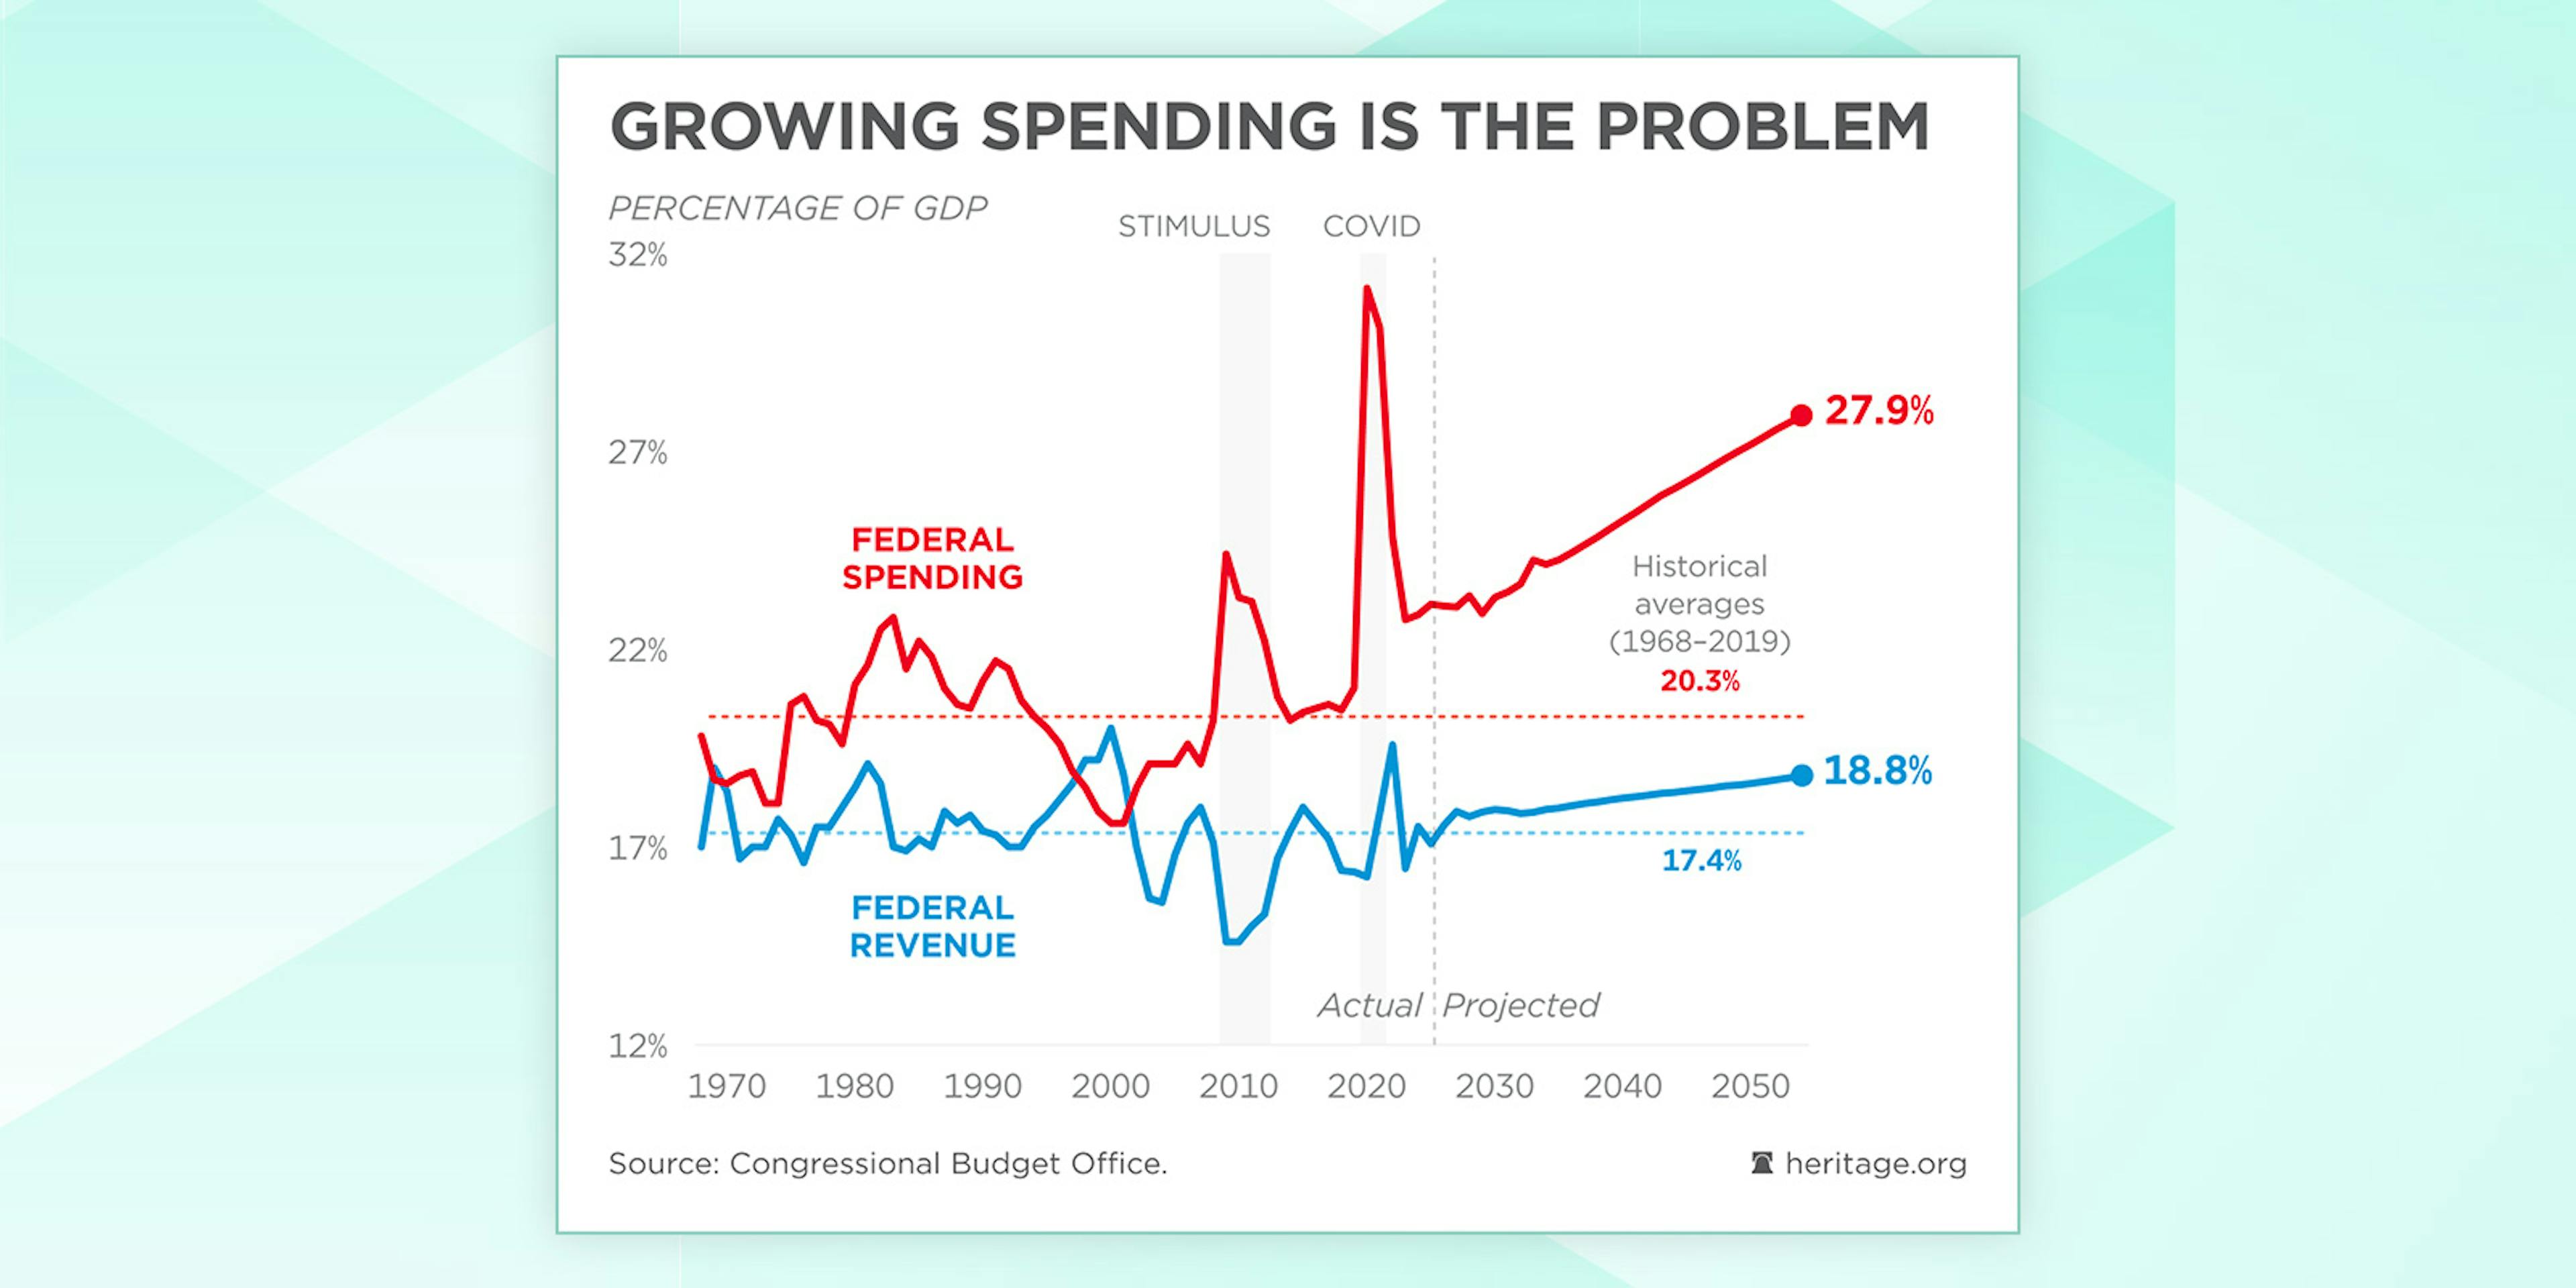 Growing spending is the problem